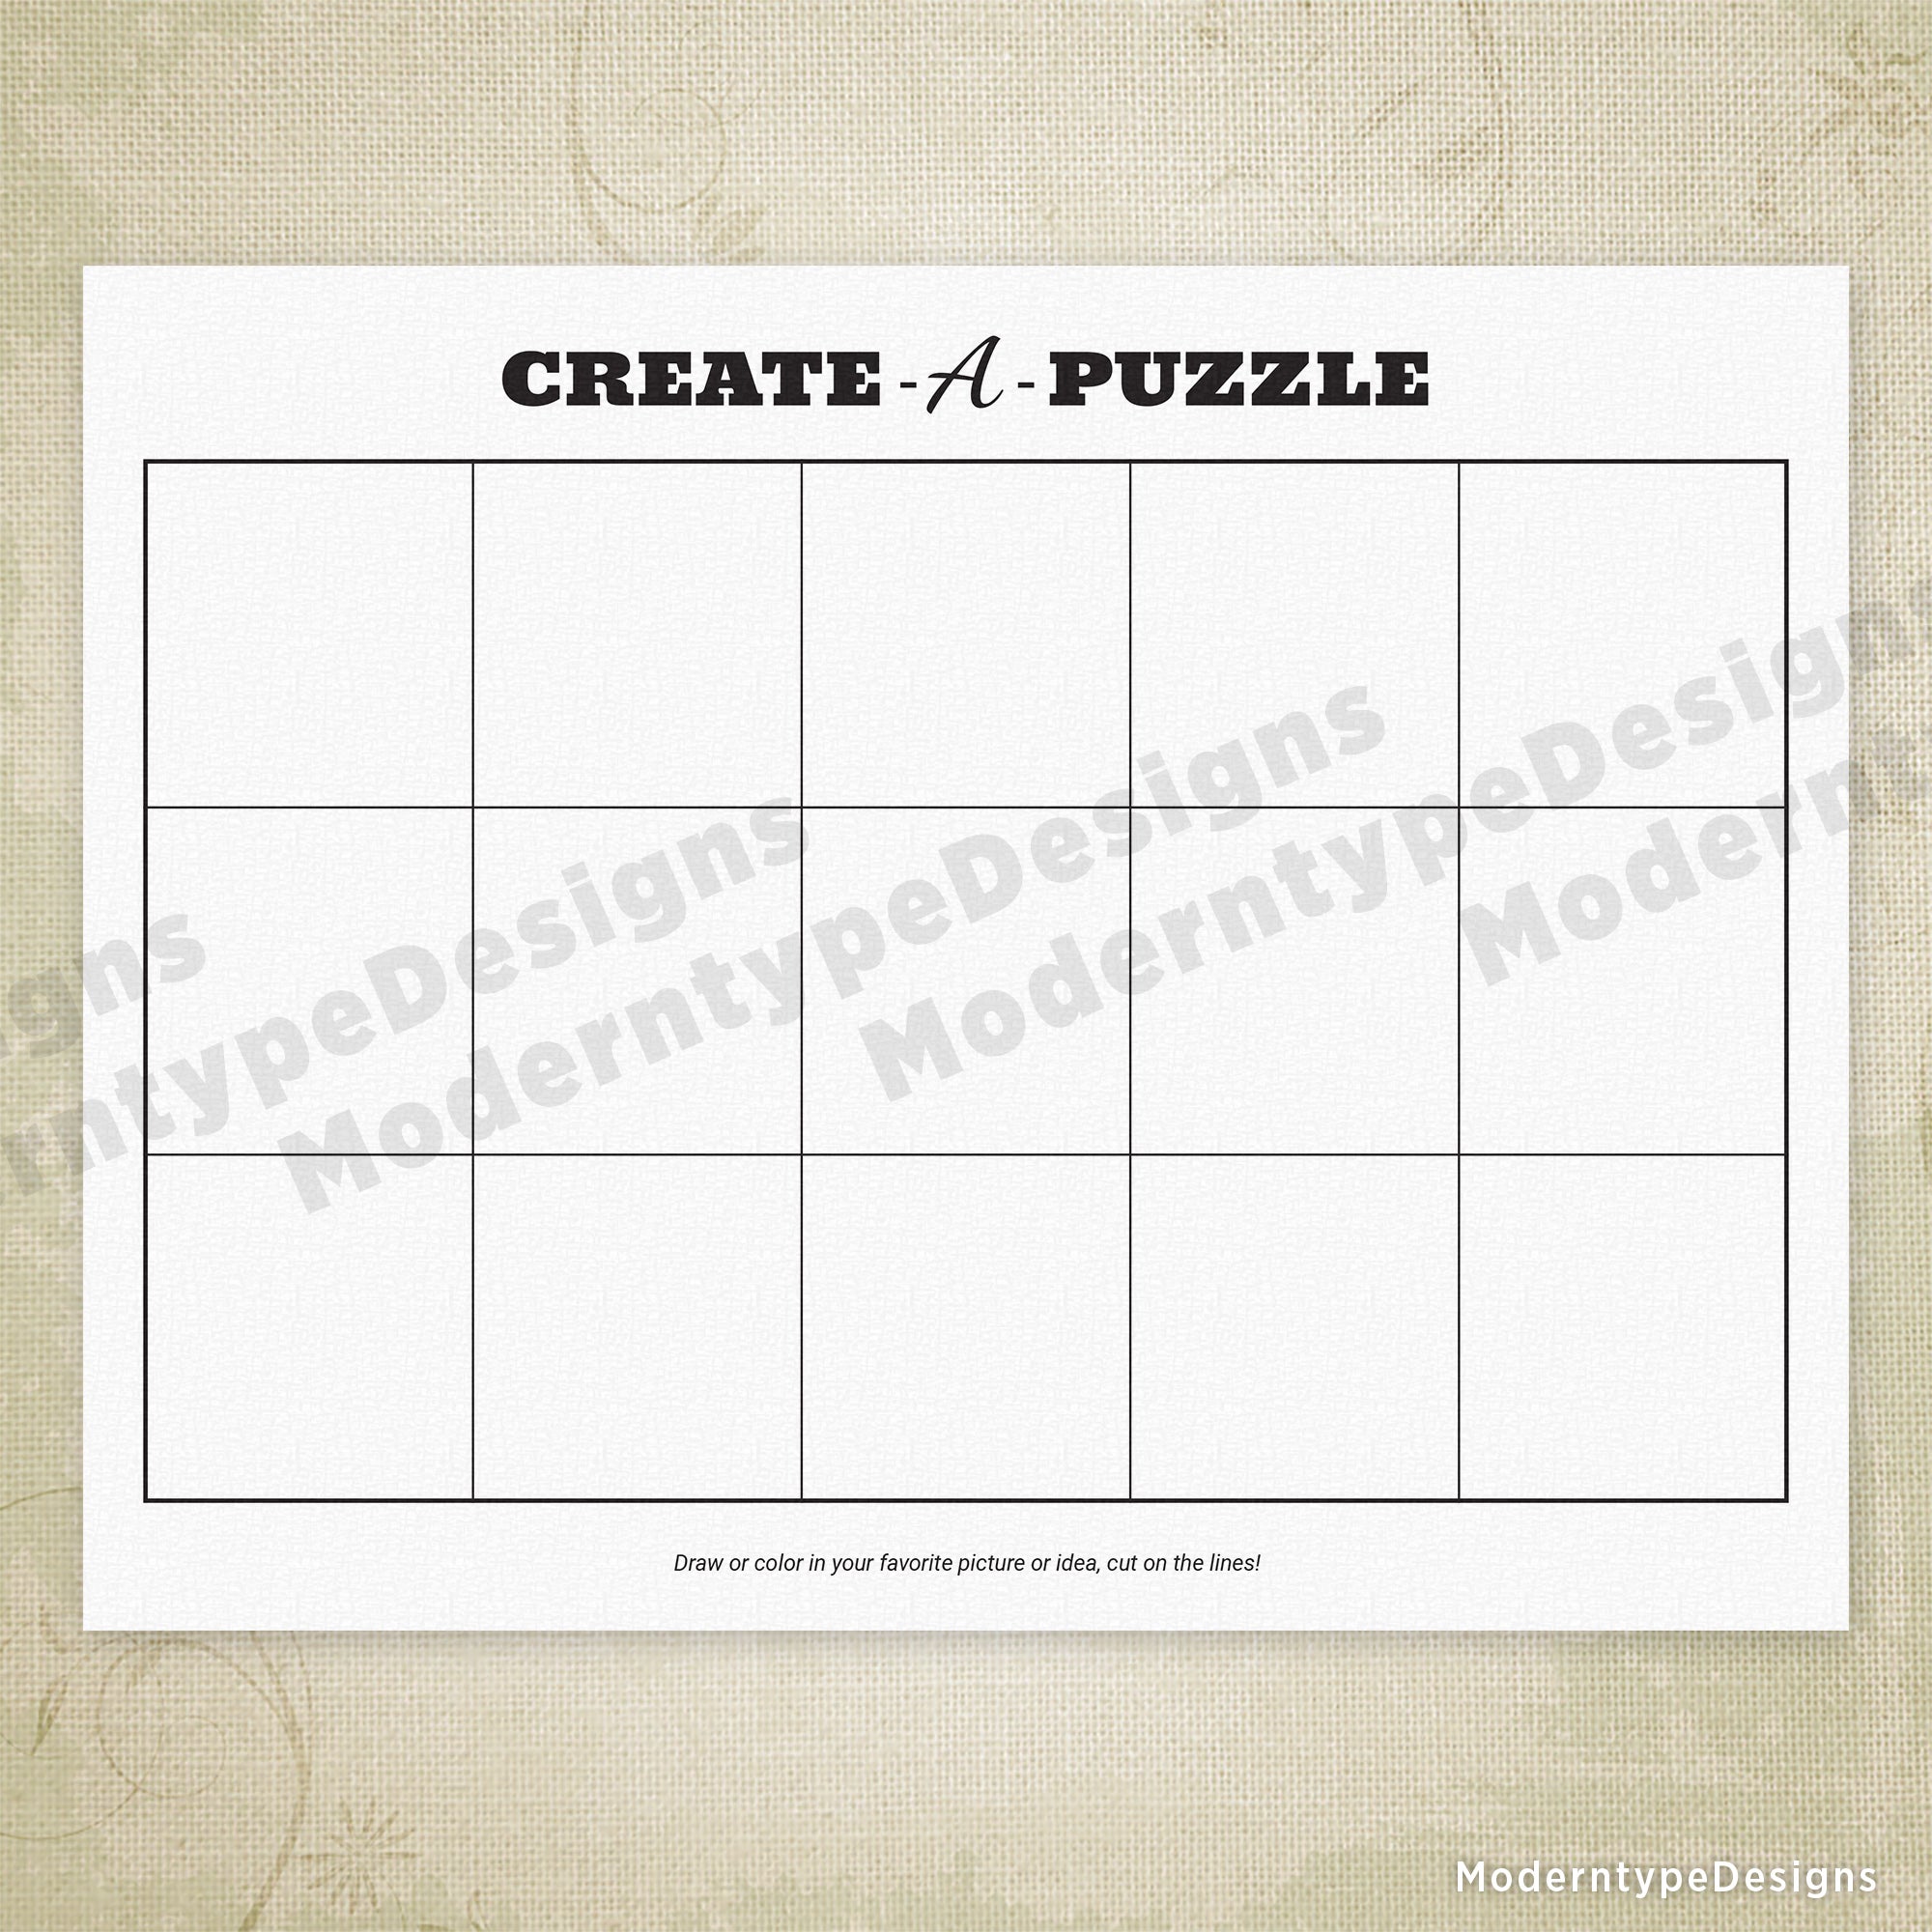 Create-a-Puzzle Printable, #2